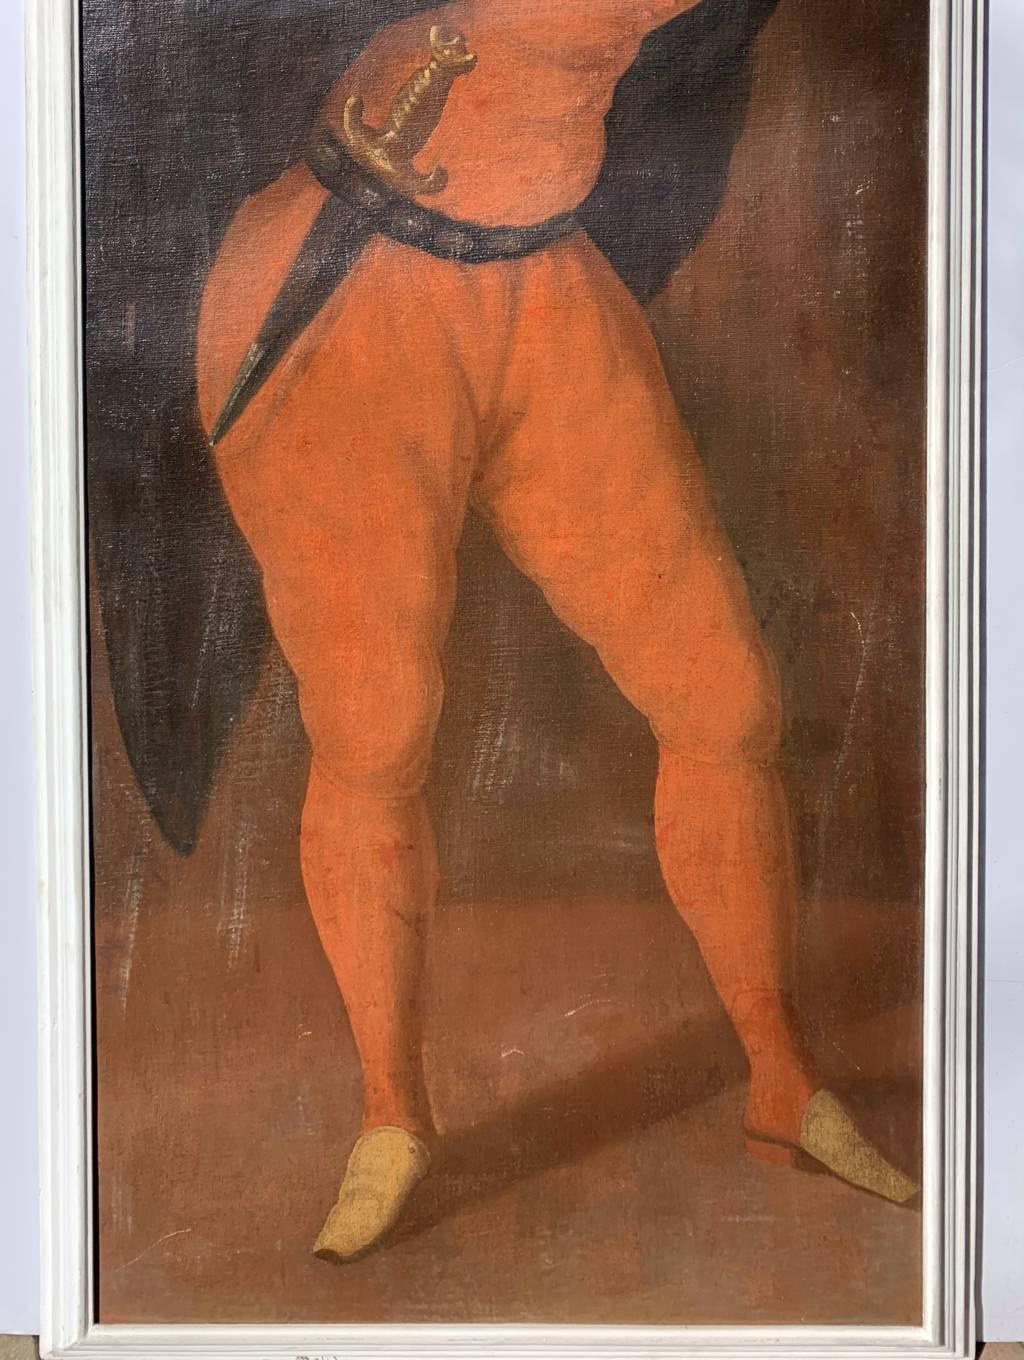 Venetian master (18th century) - Mask of Pantalone.

161 x 68 cm without frame, 169.5 x 76.5 cm with frame.

Antique oil painting on canvas, in a white lacquered wooden frame.

Condition Report: Original canvas glued on panel. Good condition of the